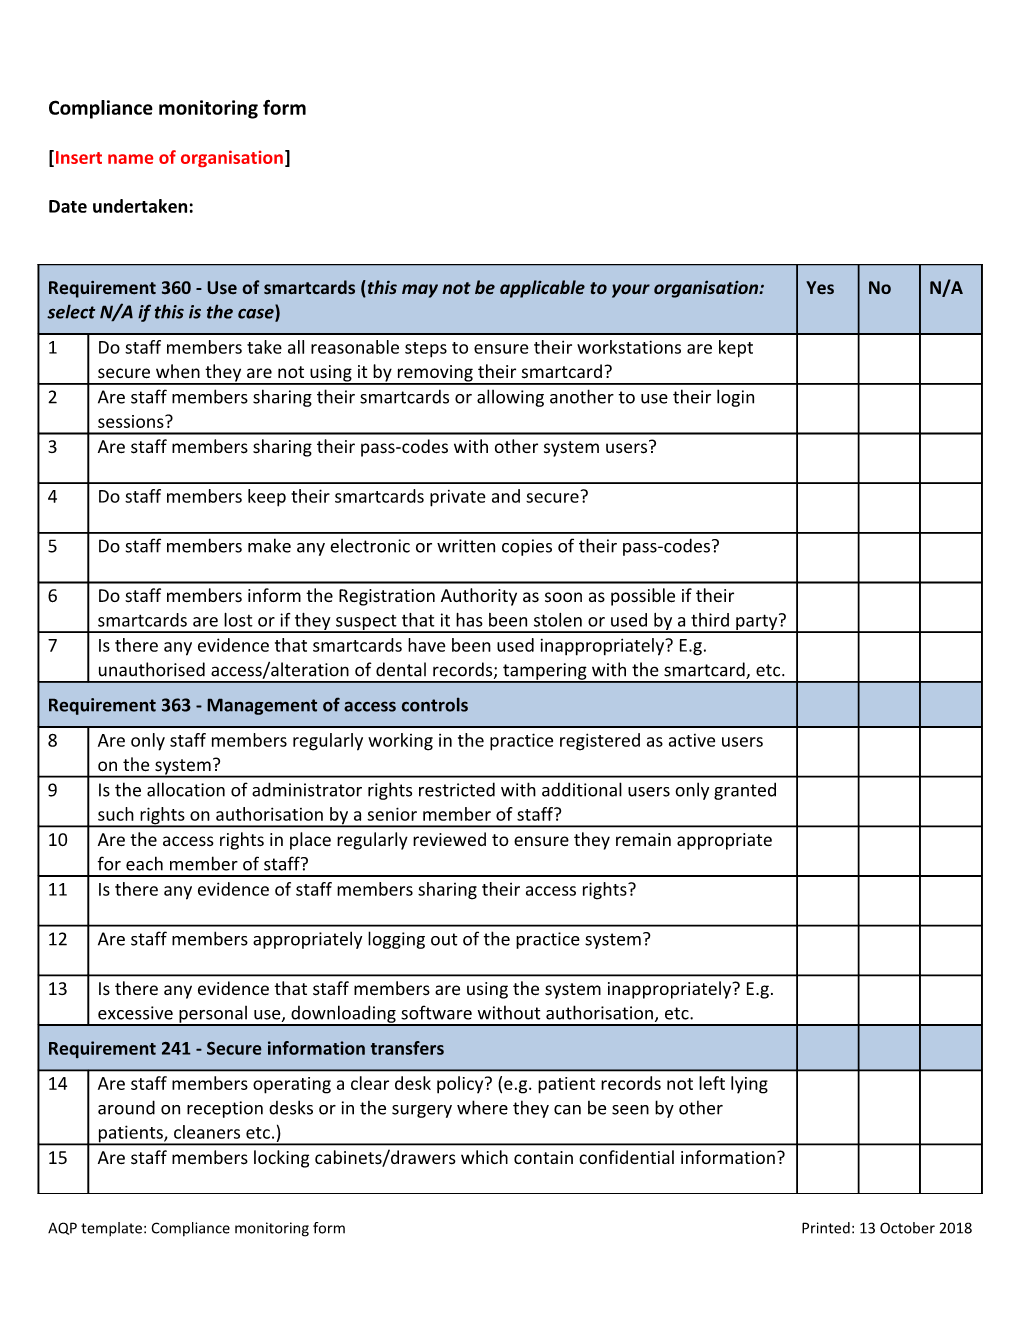 Compliance Monitoring Form